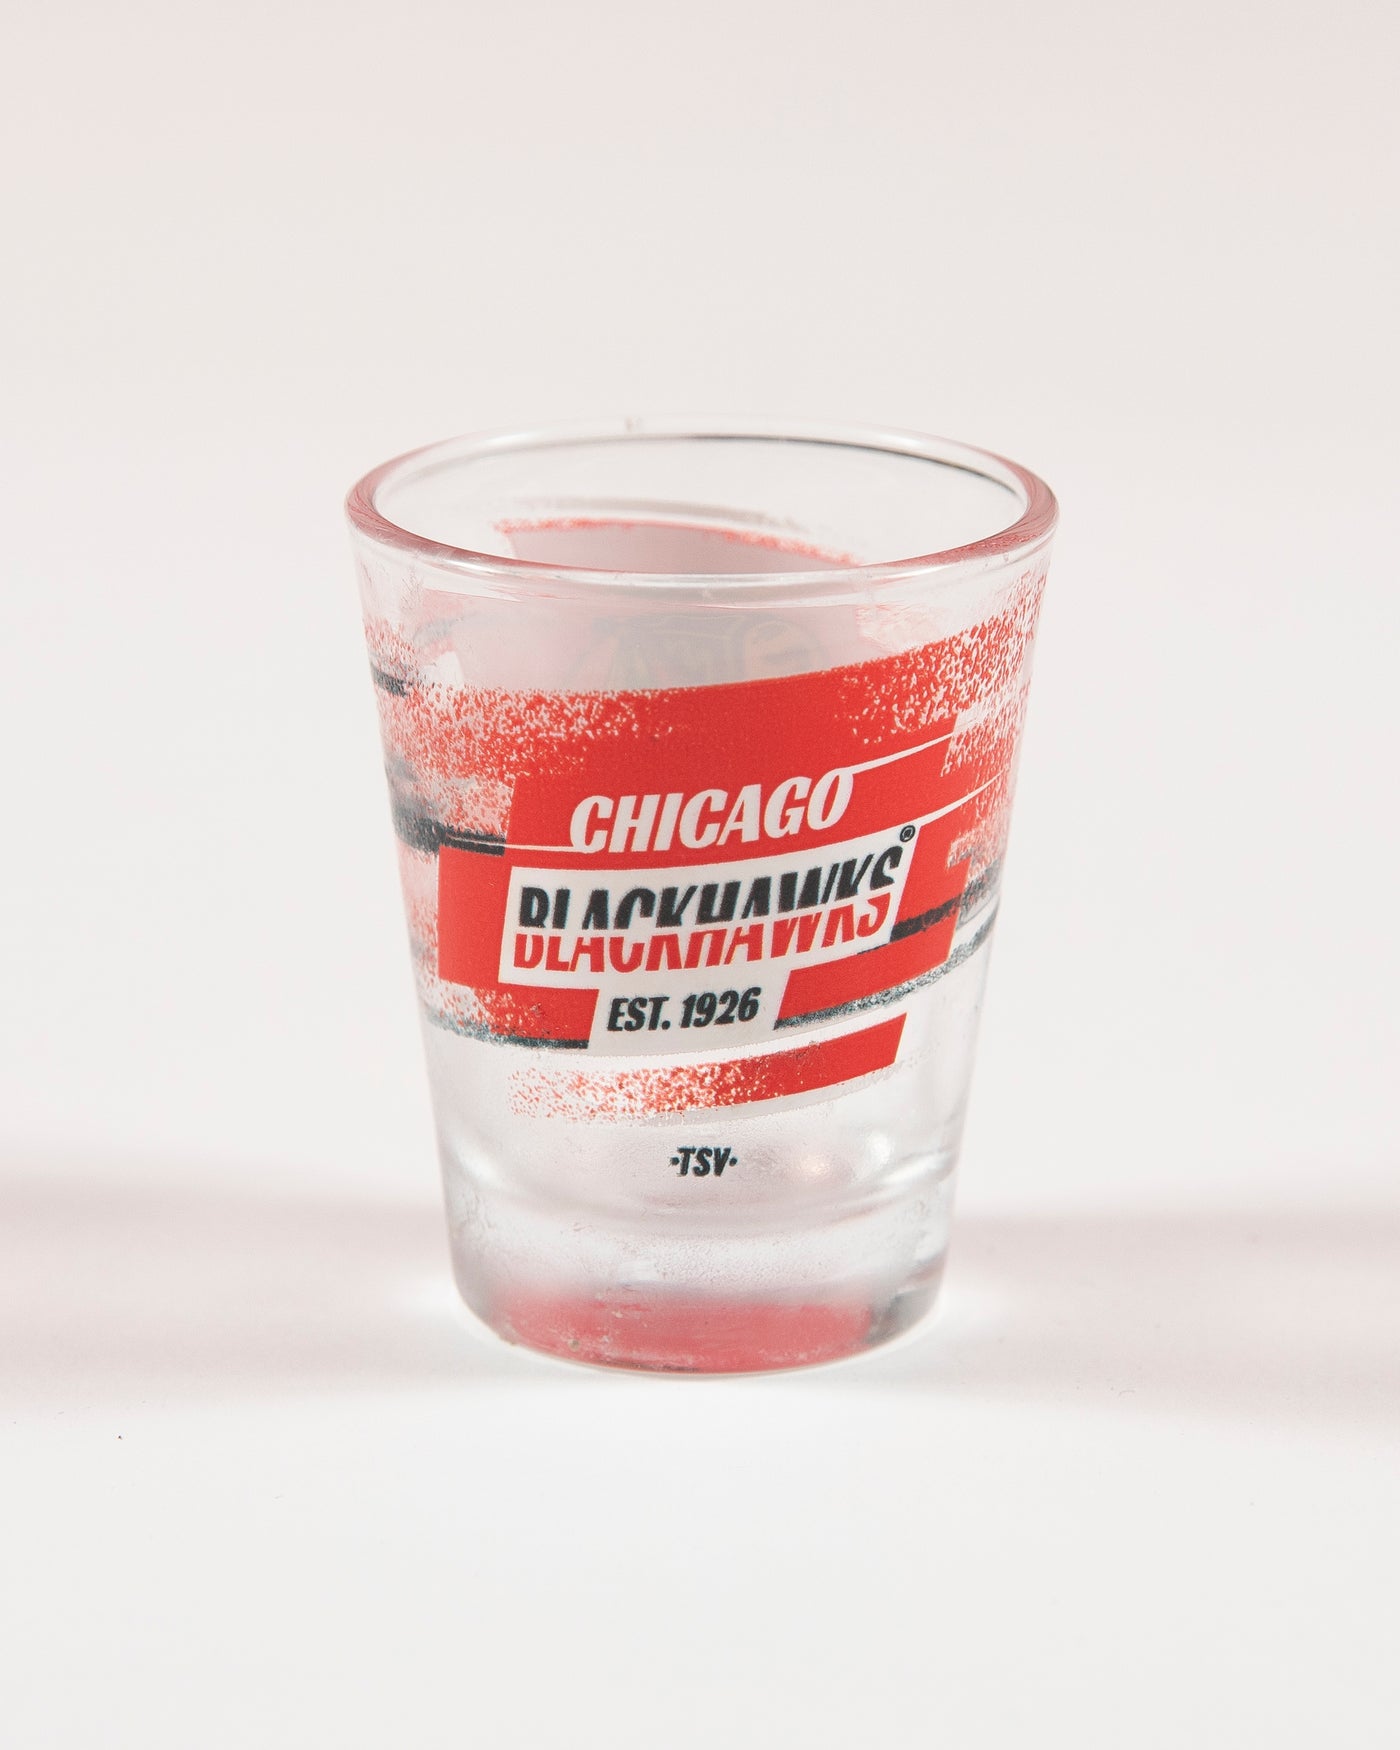 Chicago Blackhawks branded shot glass with primary logo - back angle